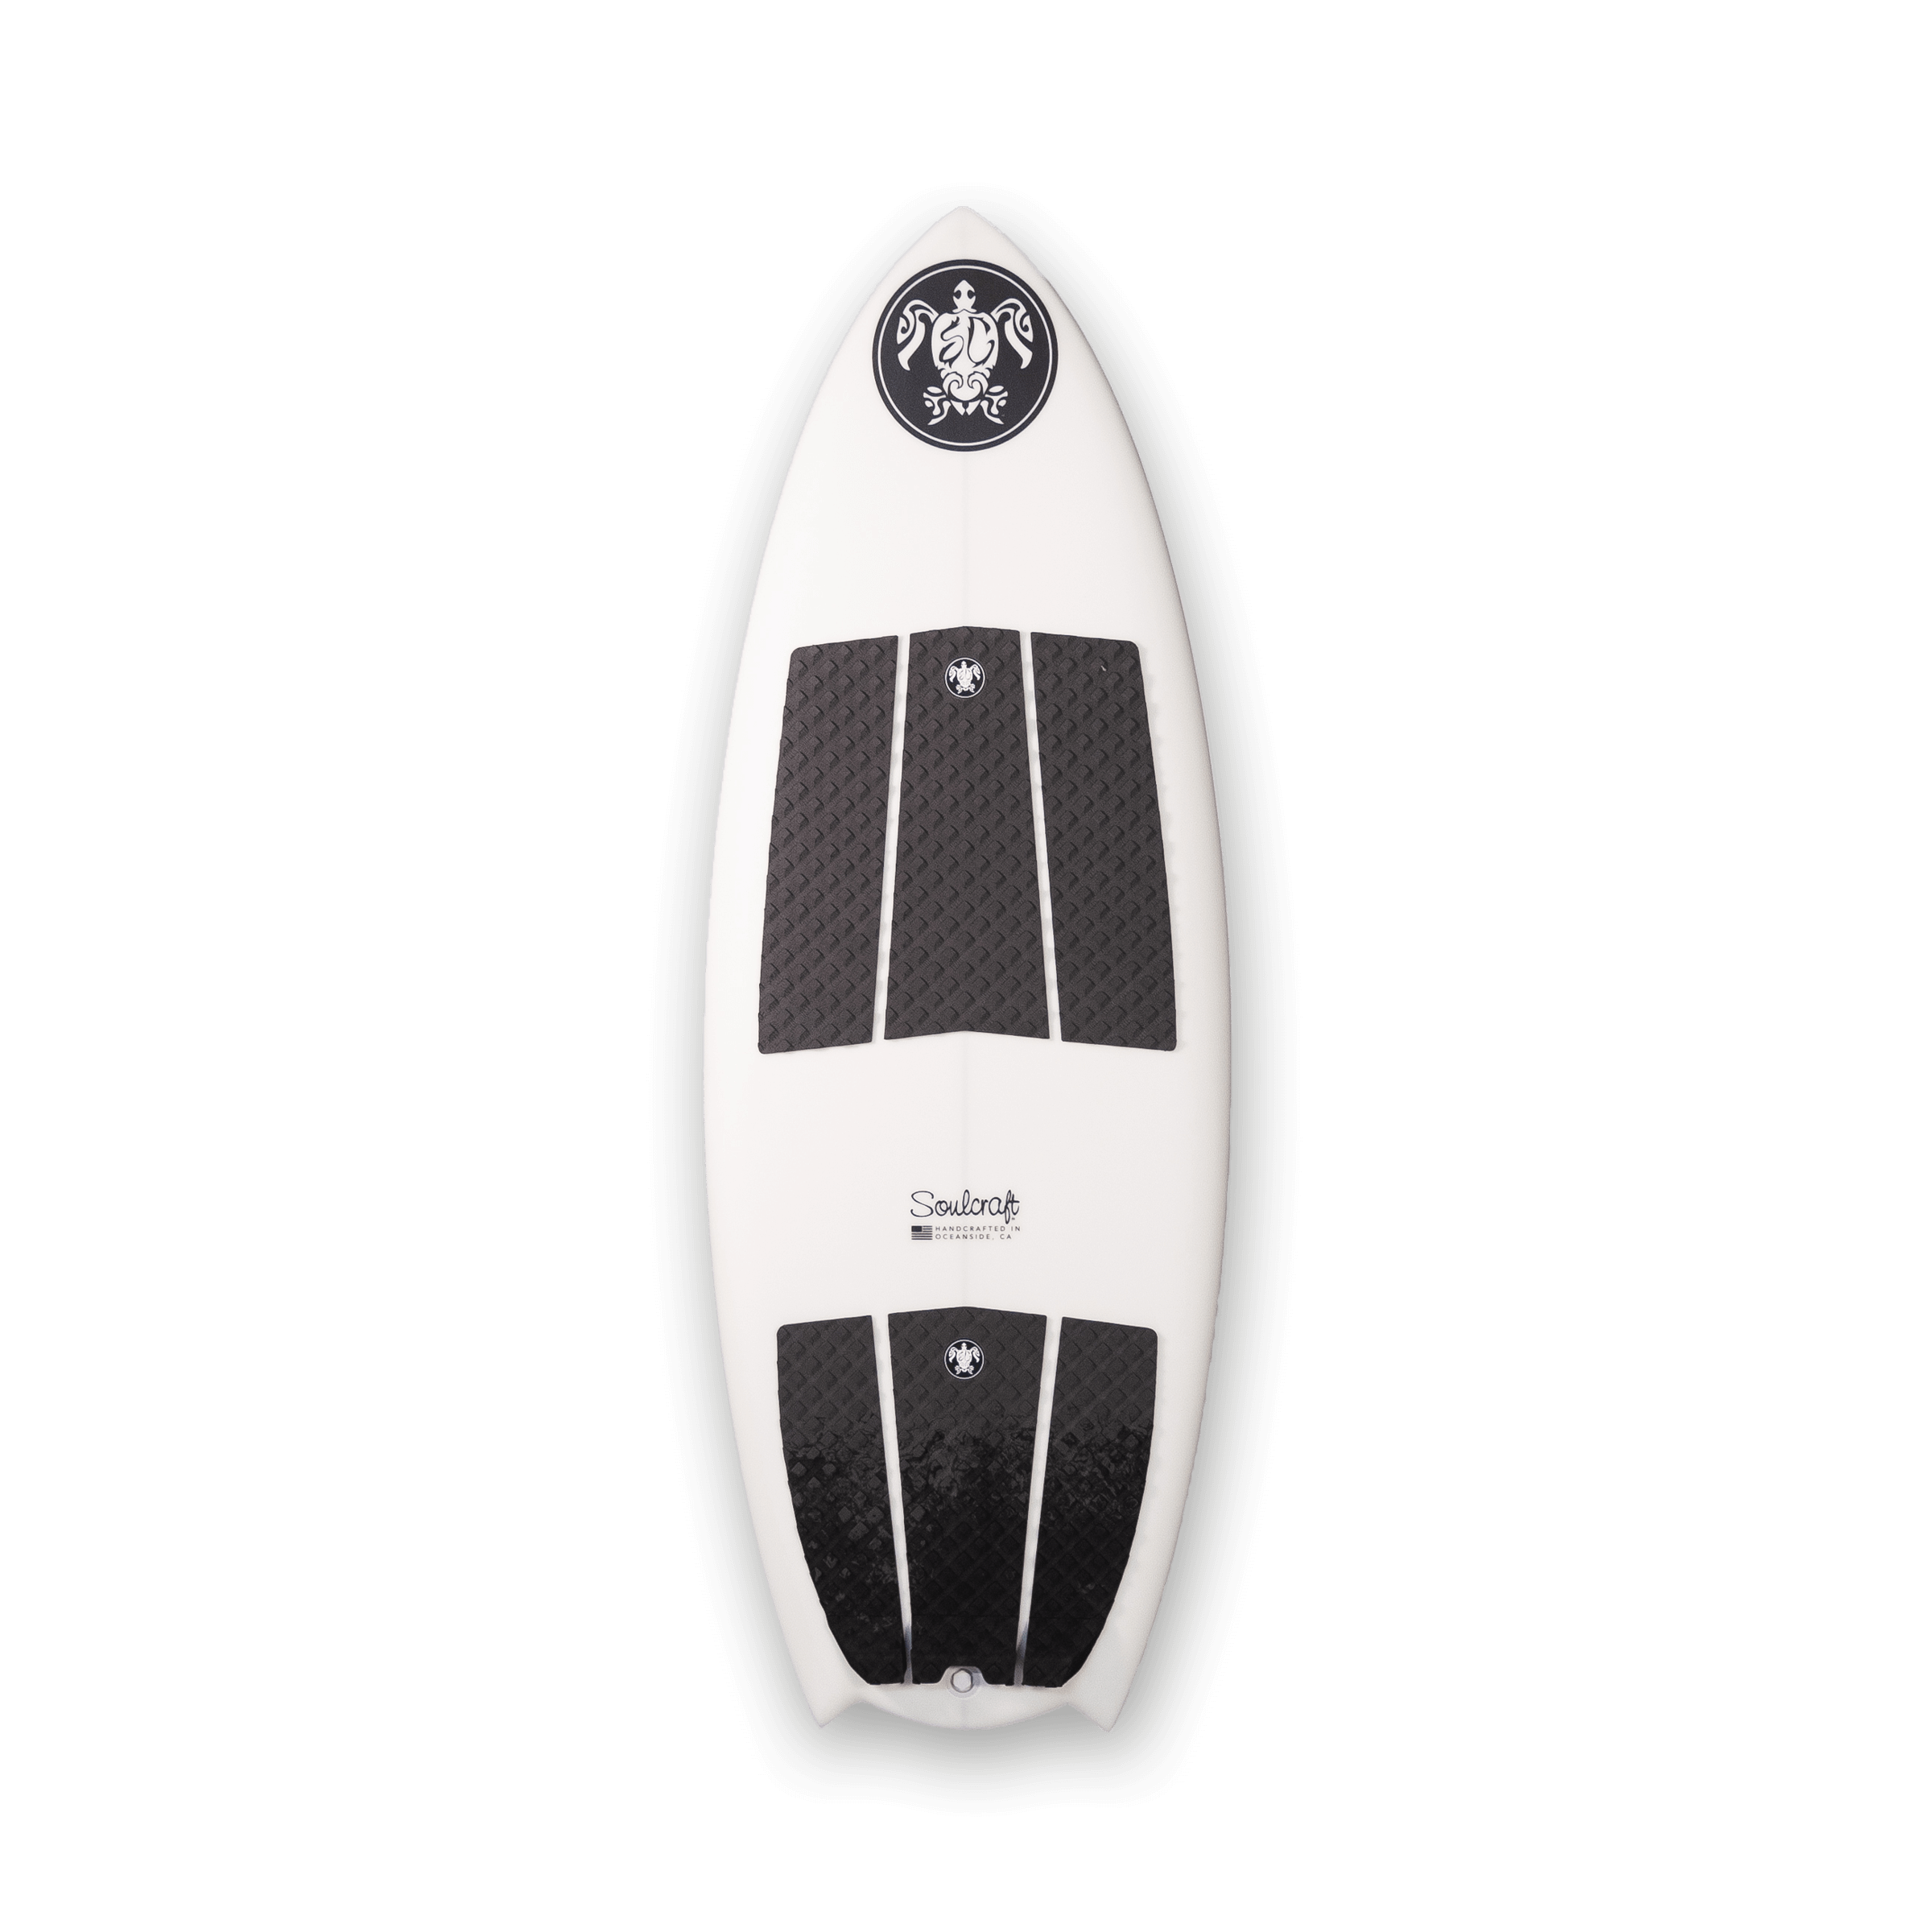 An intermediate rider's Soulcraft Control Freak Wakesurf Board designed for speed generation, featuring a striking white and black design on a sleek black background.